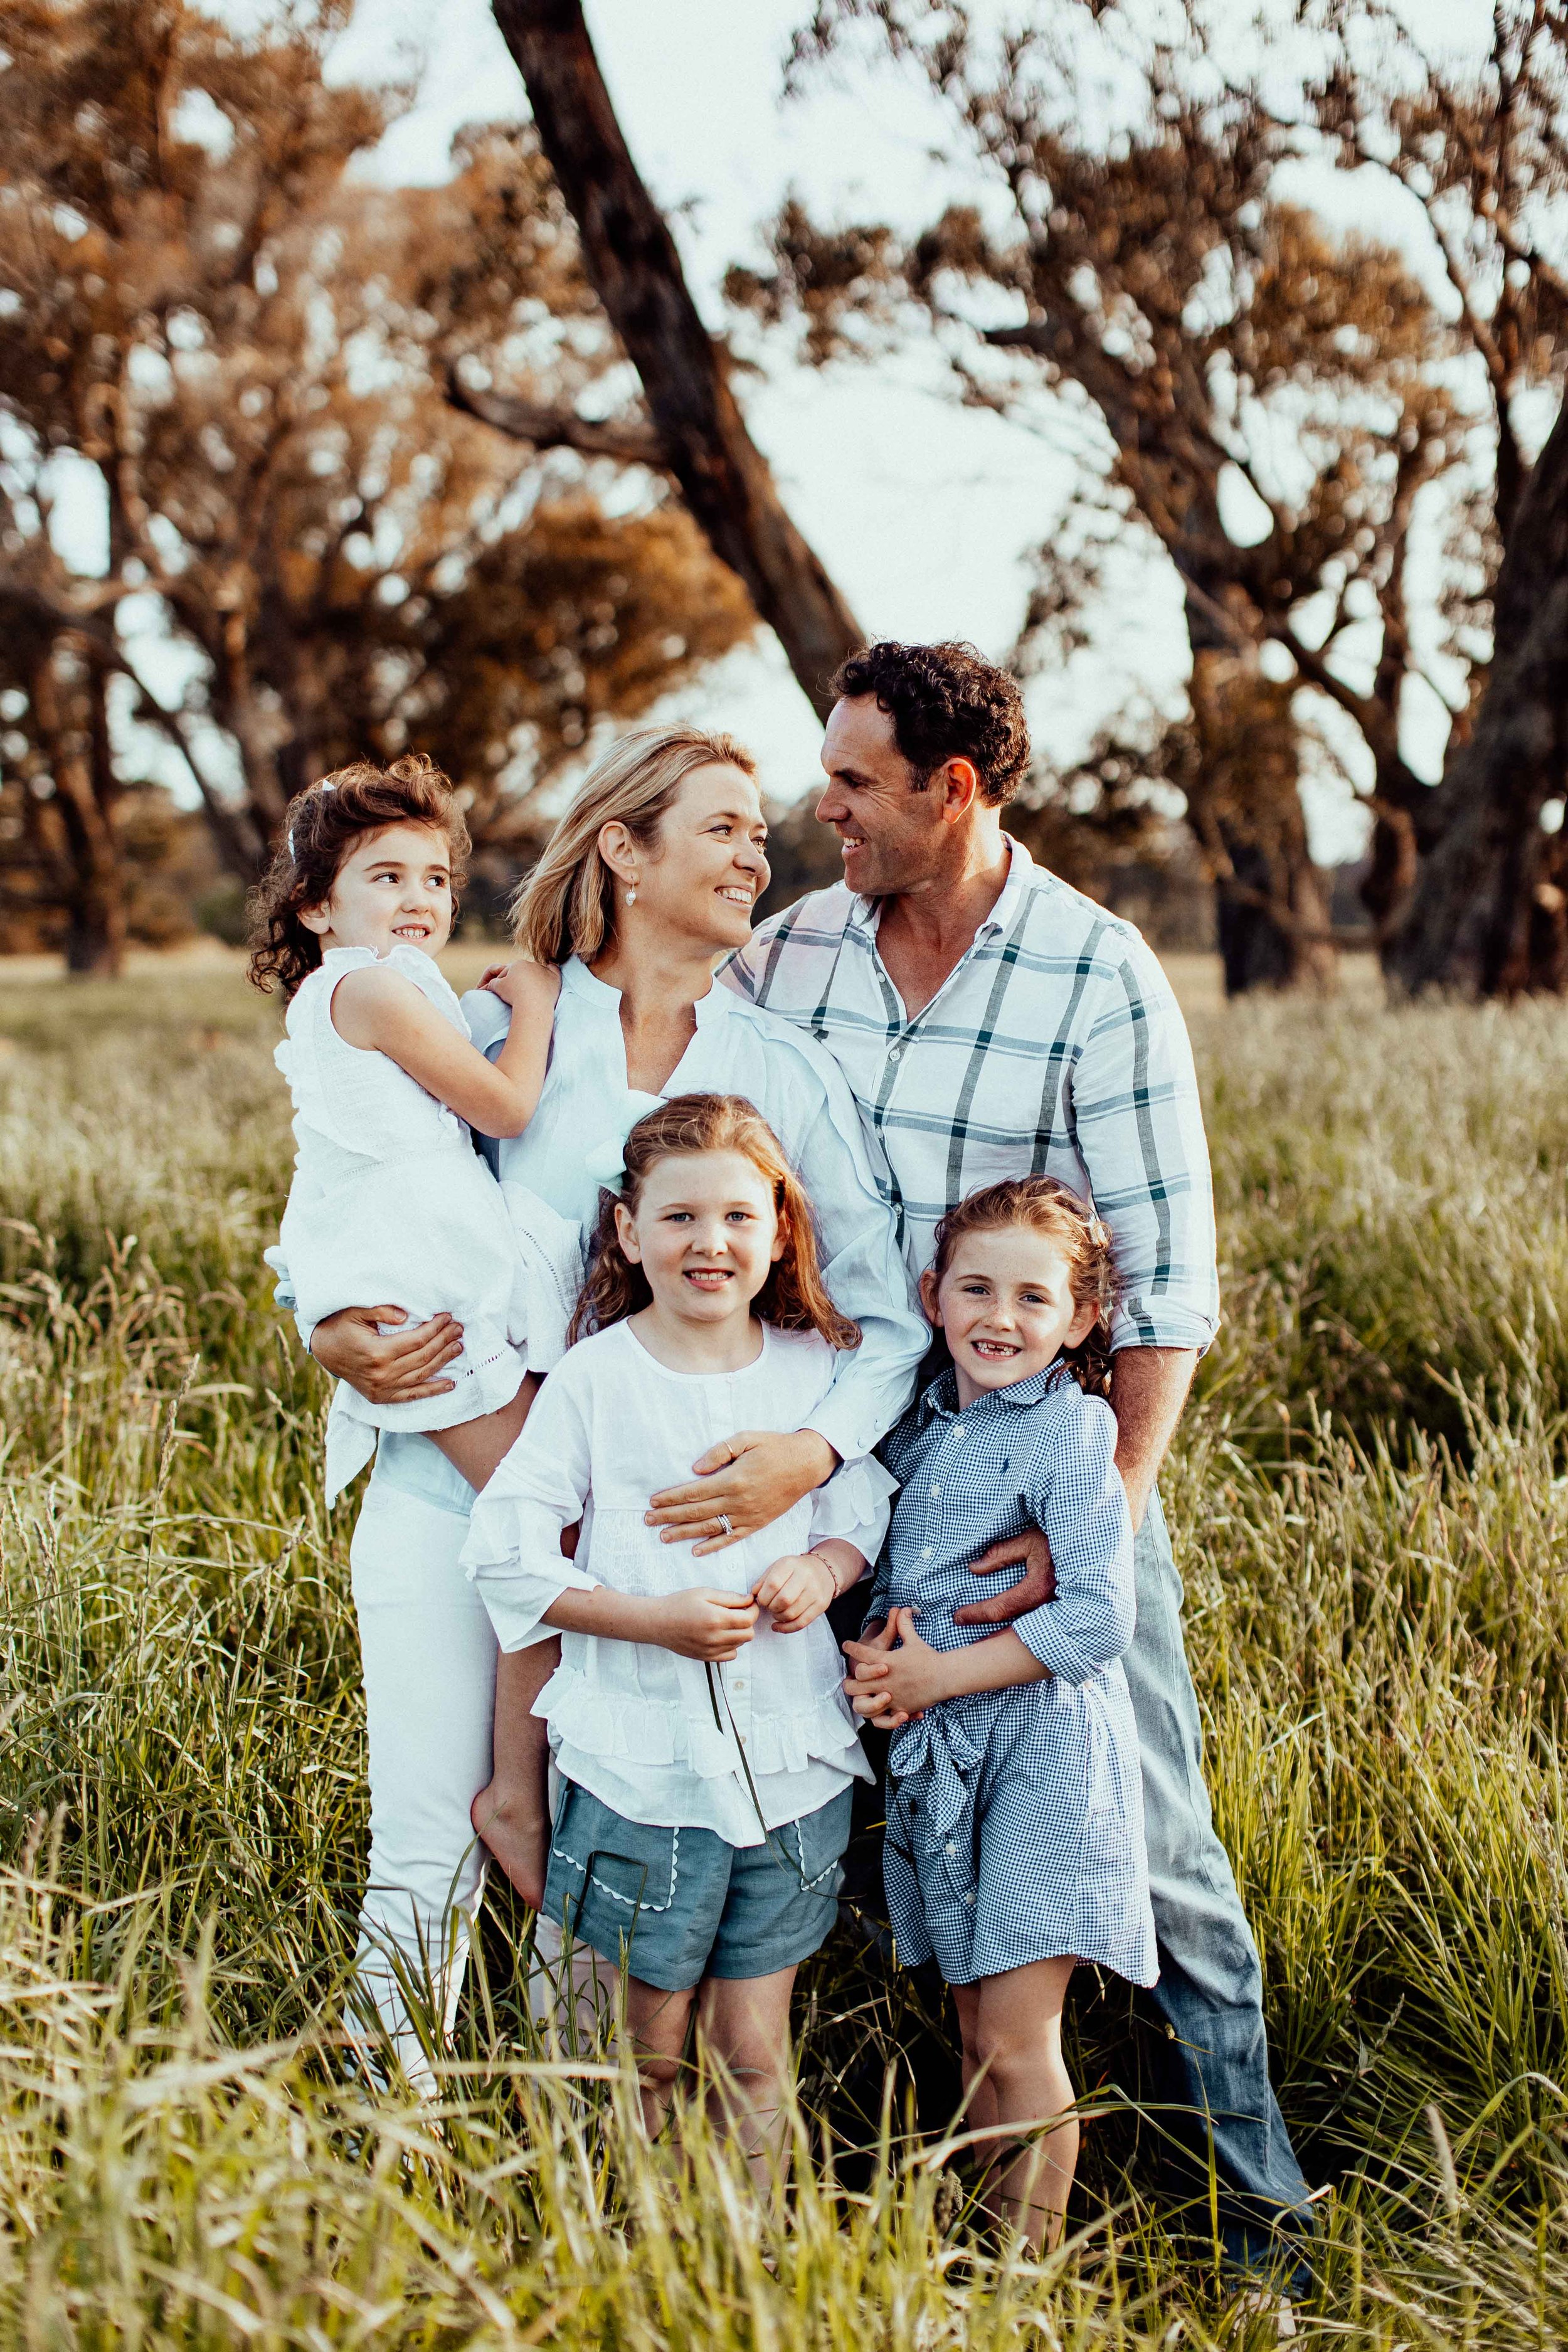 carroll-family-exeter-southern-hoghlands-inhome-family-lifestyle-wollondilly-camden-macarthur-sydney-photography-www.emilyobrienphotography.net-72.jpg